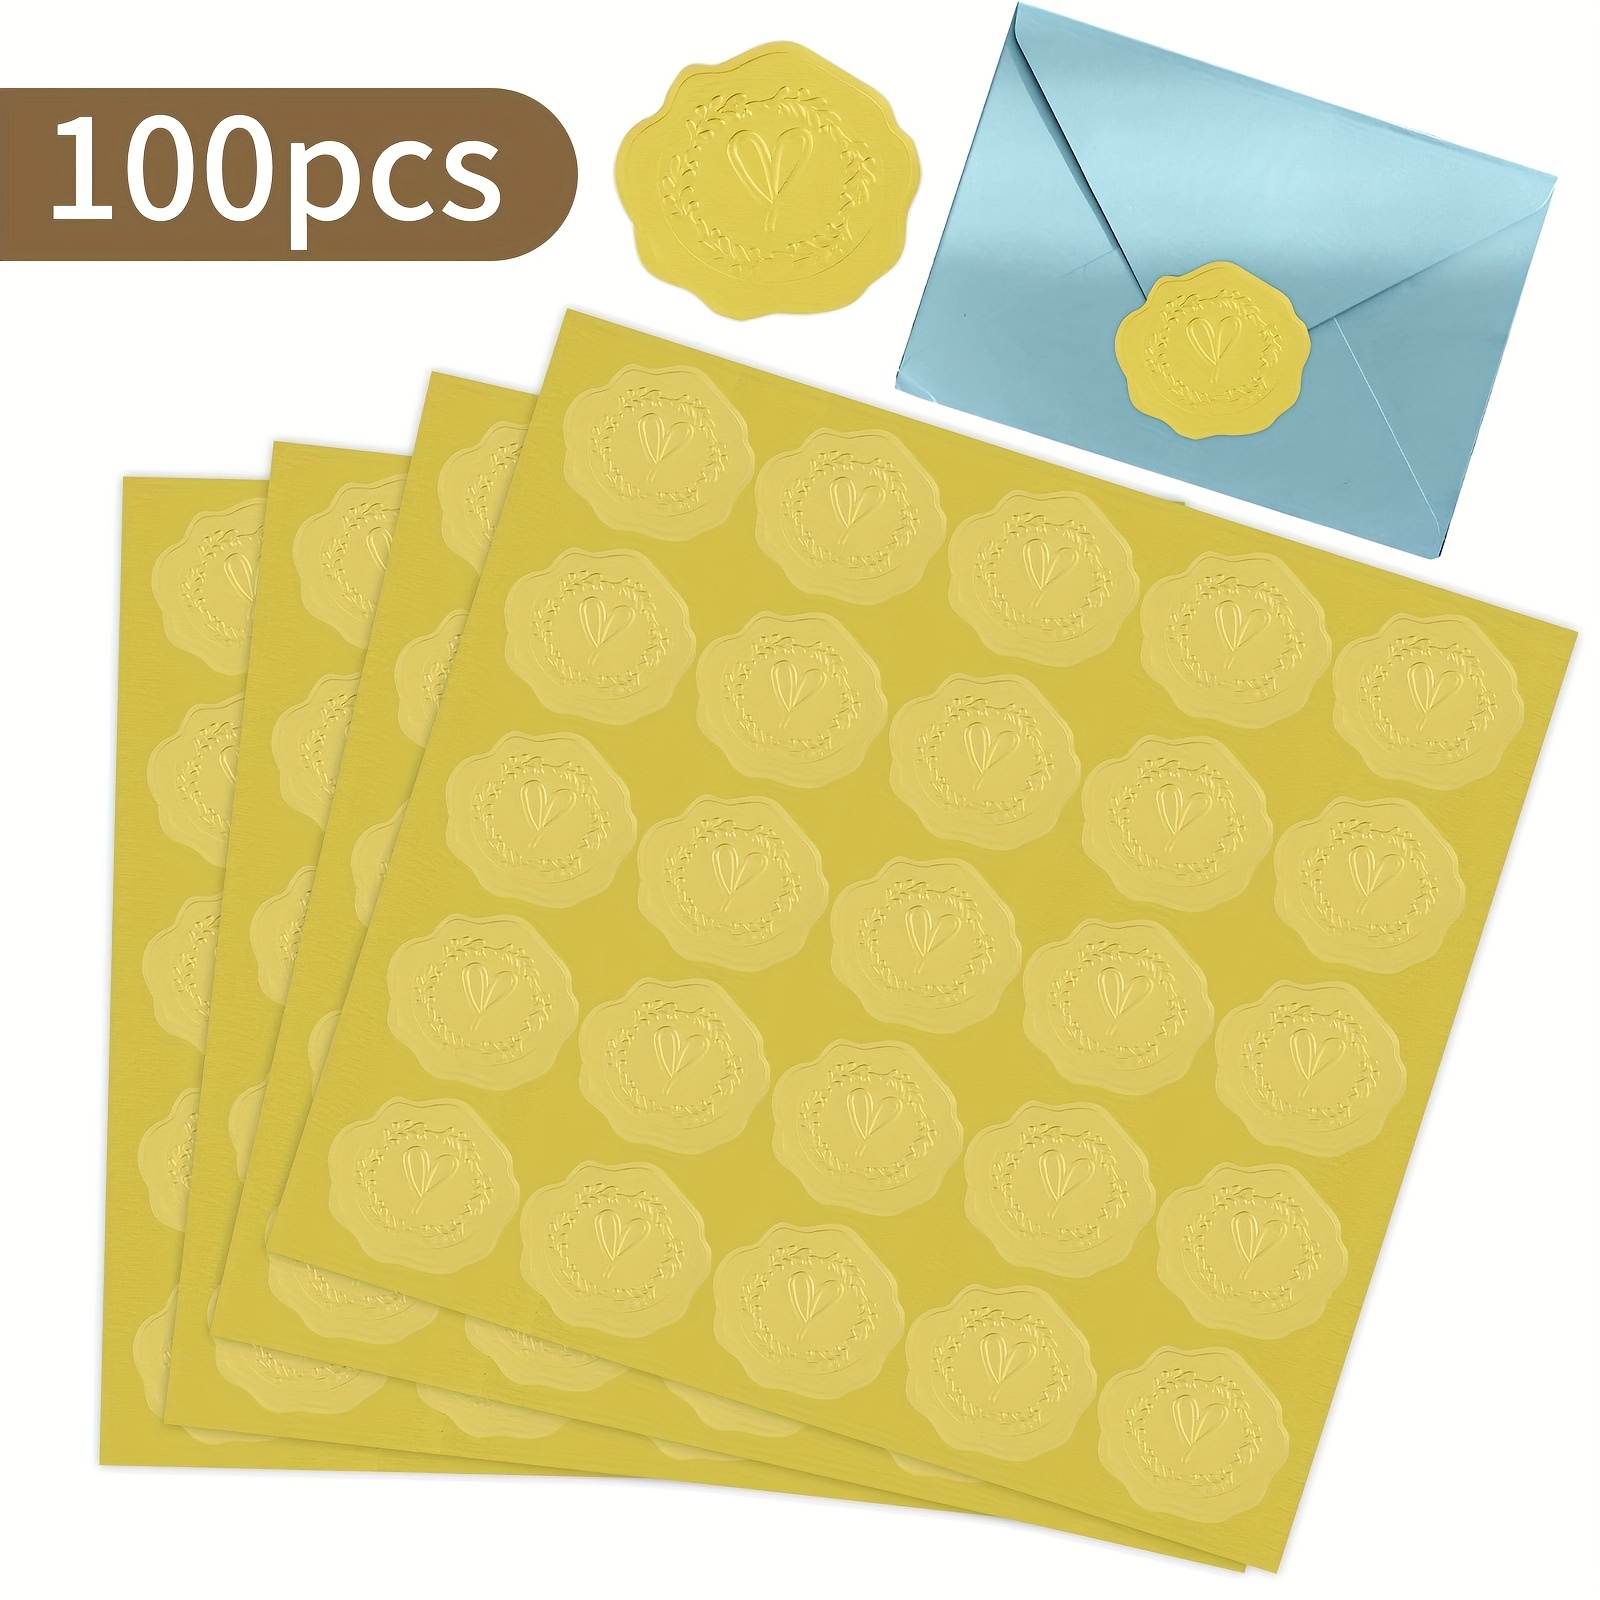 100pcs Gold Embossed Heart Envelope Seals Stickers For Wedding  Invitations,Party Favors,Greeting Cards,Gift Packaging .etc (Gold,  Self-Adhesive)